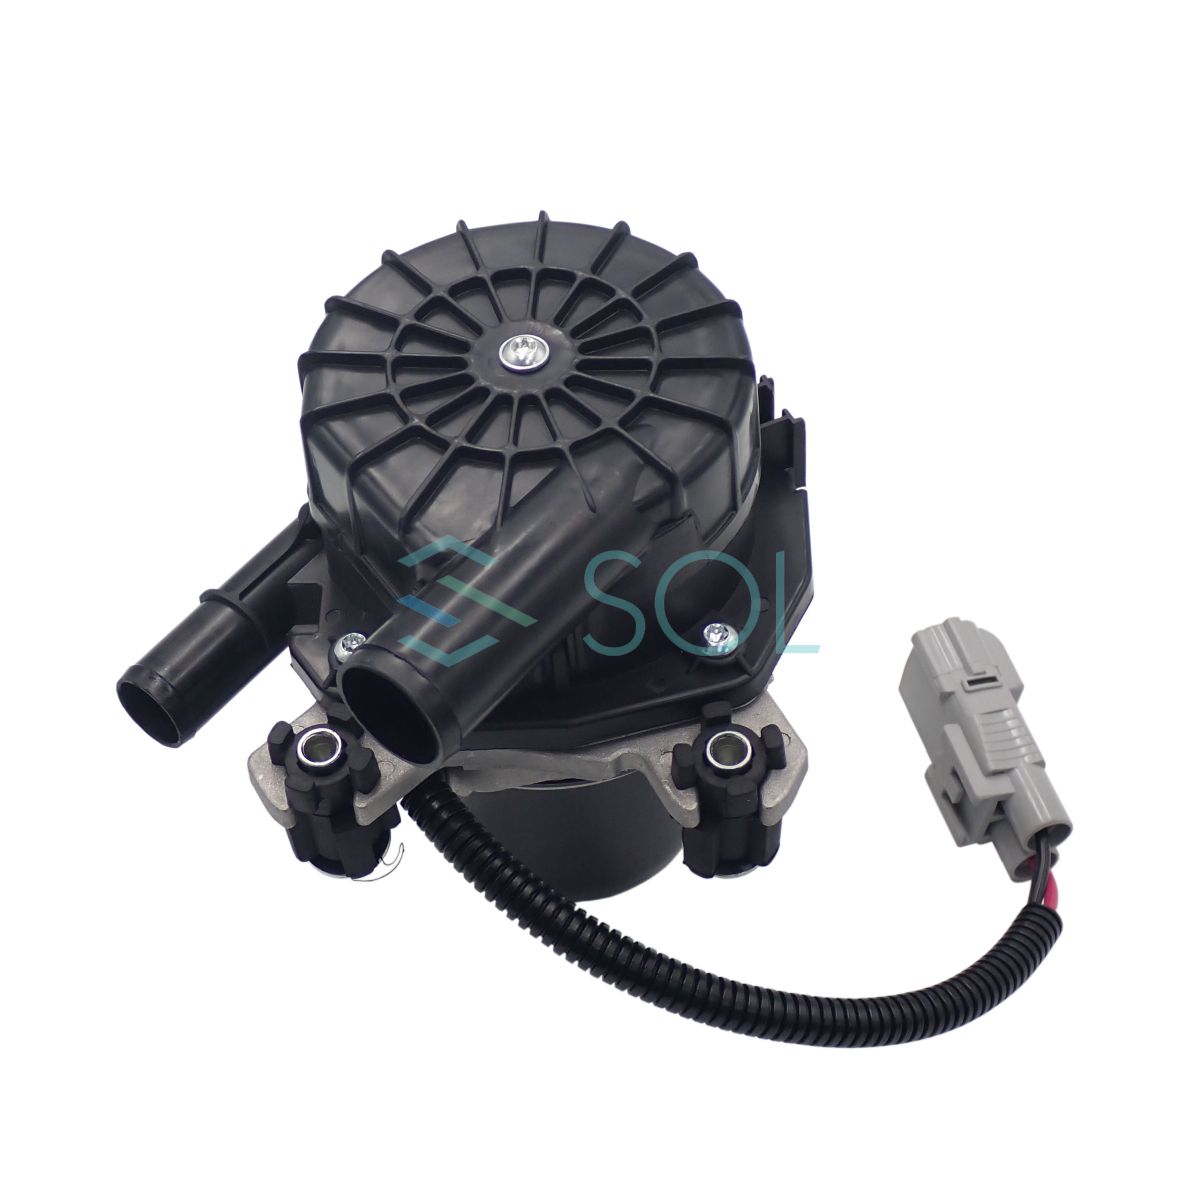  Toyota Dyna Toyoace (TRY220 TRY230) Hilux Surf (TRN210W TRN215W) air pump 17610-0C010 shipping deadline 18 hour 